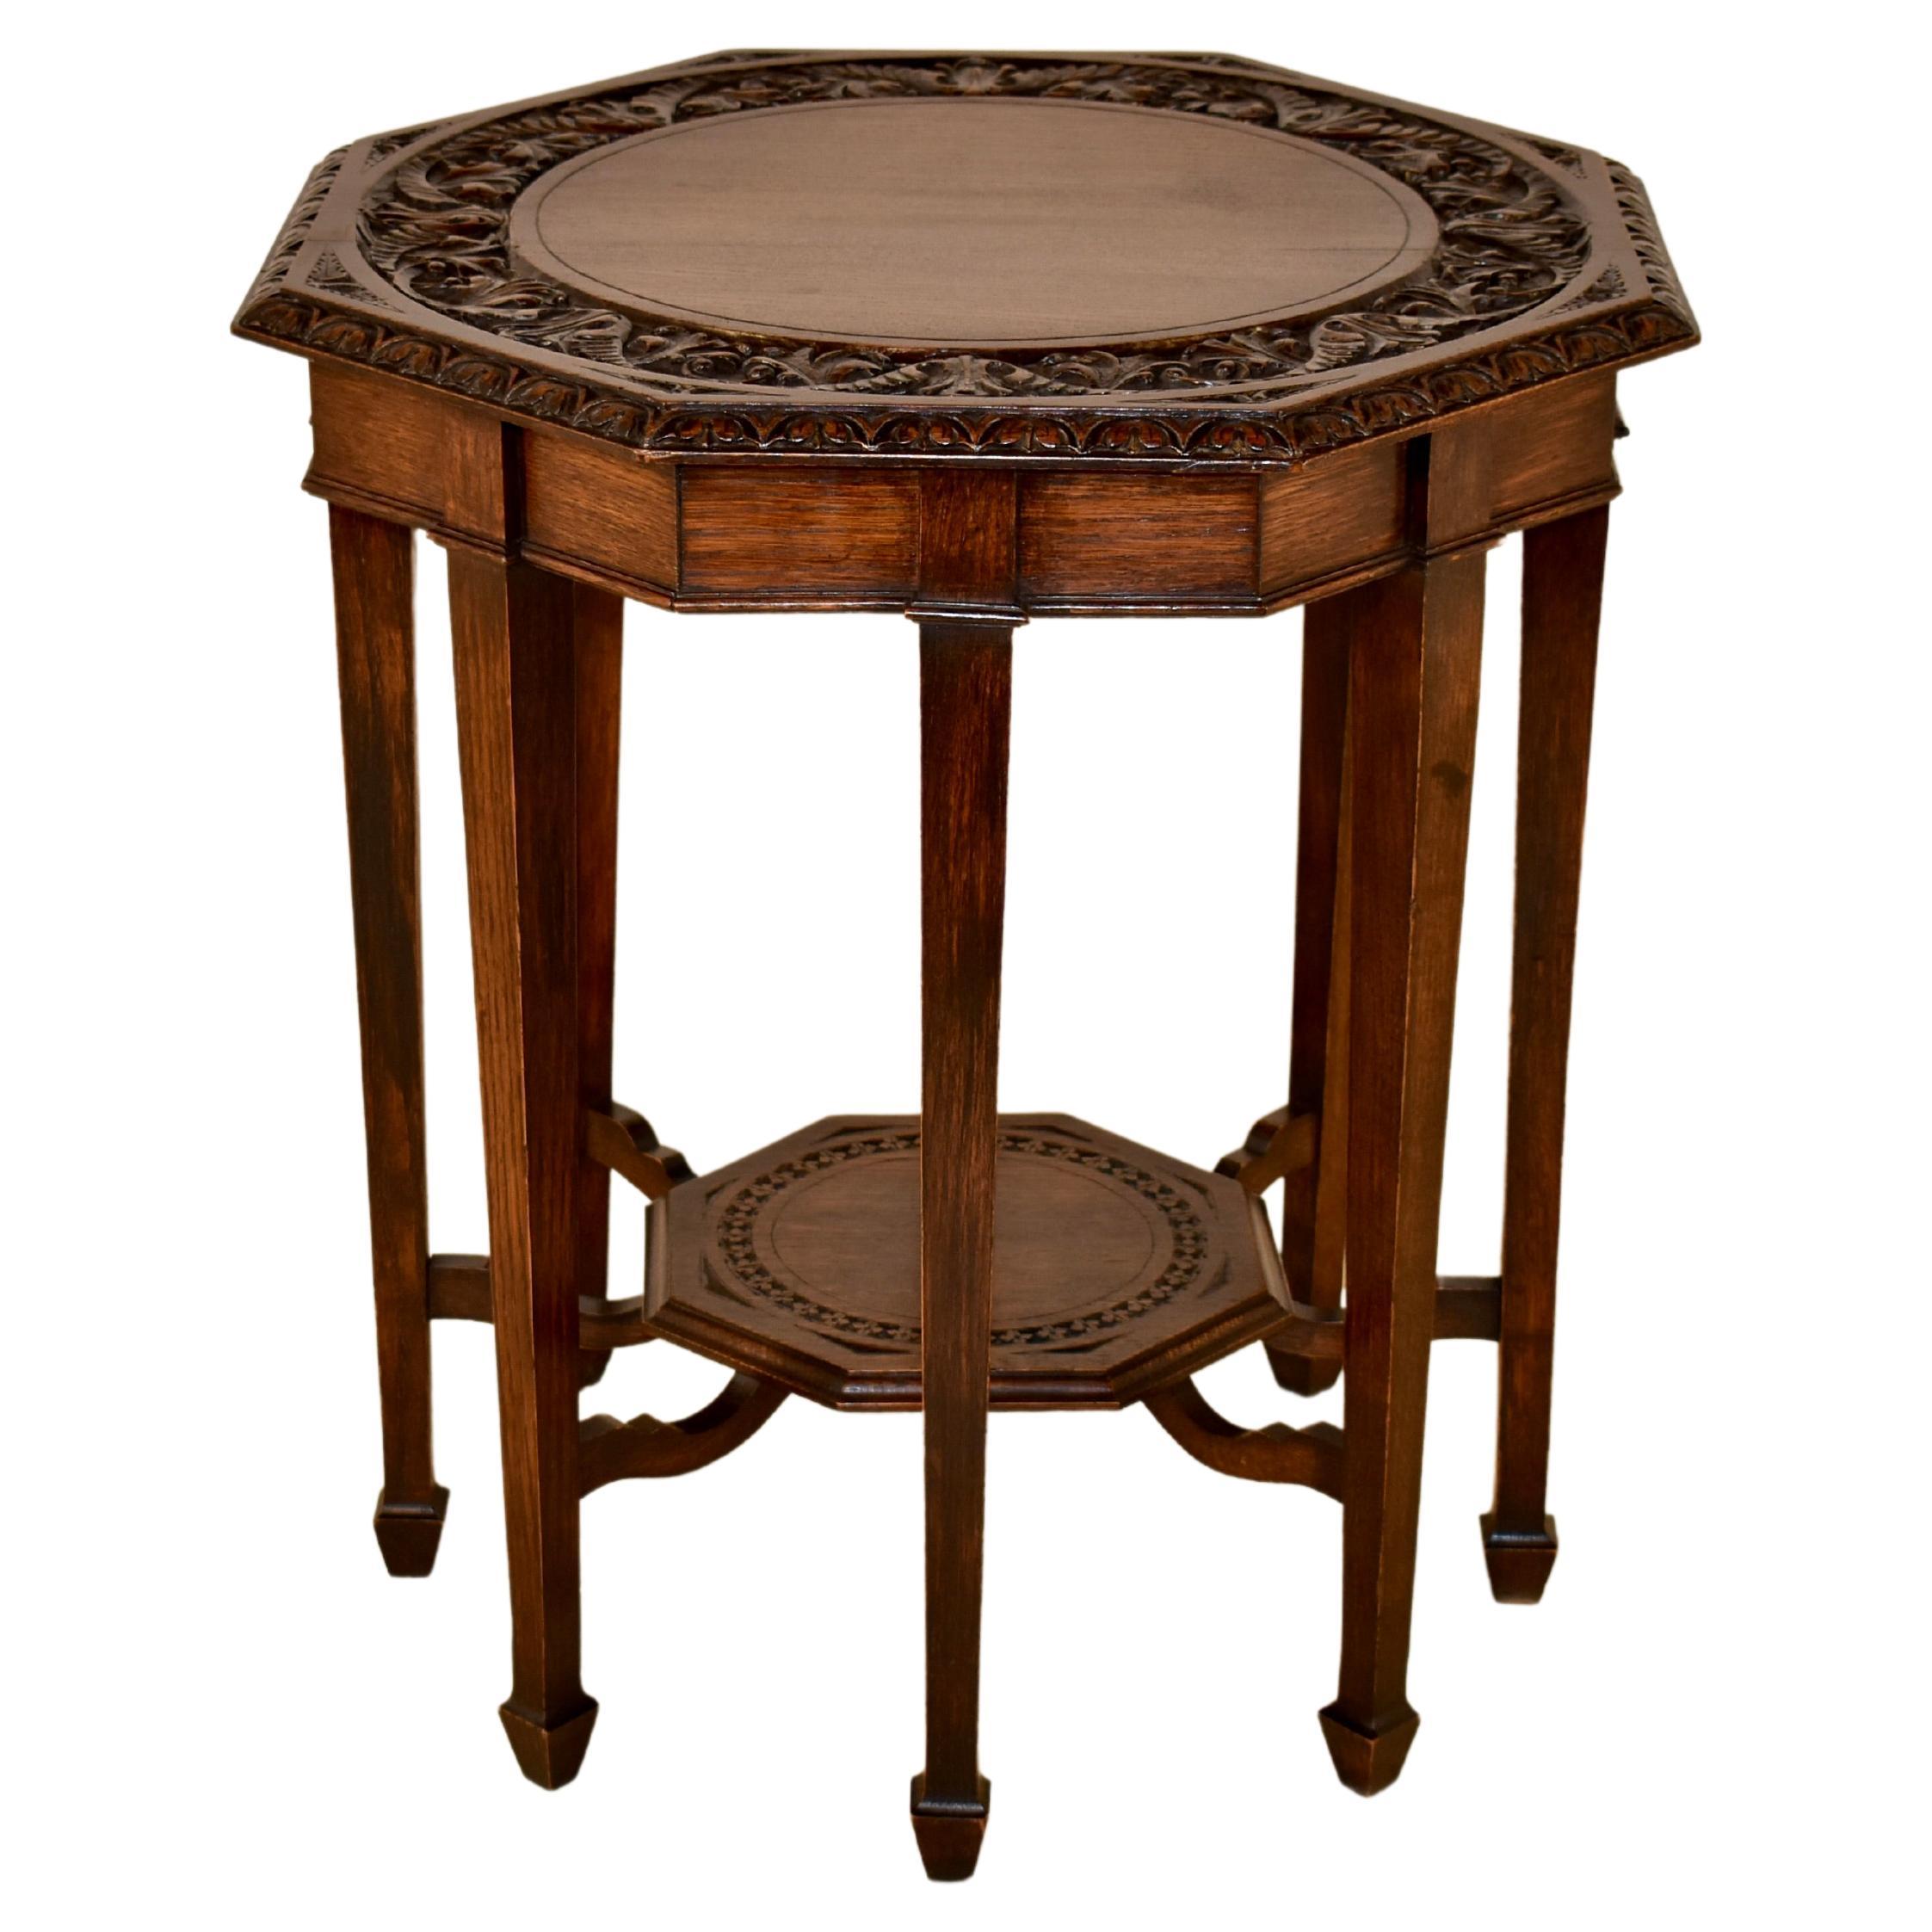 Late 19th Century Octagonal Side Table